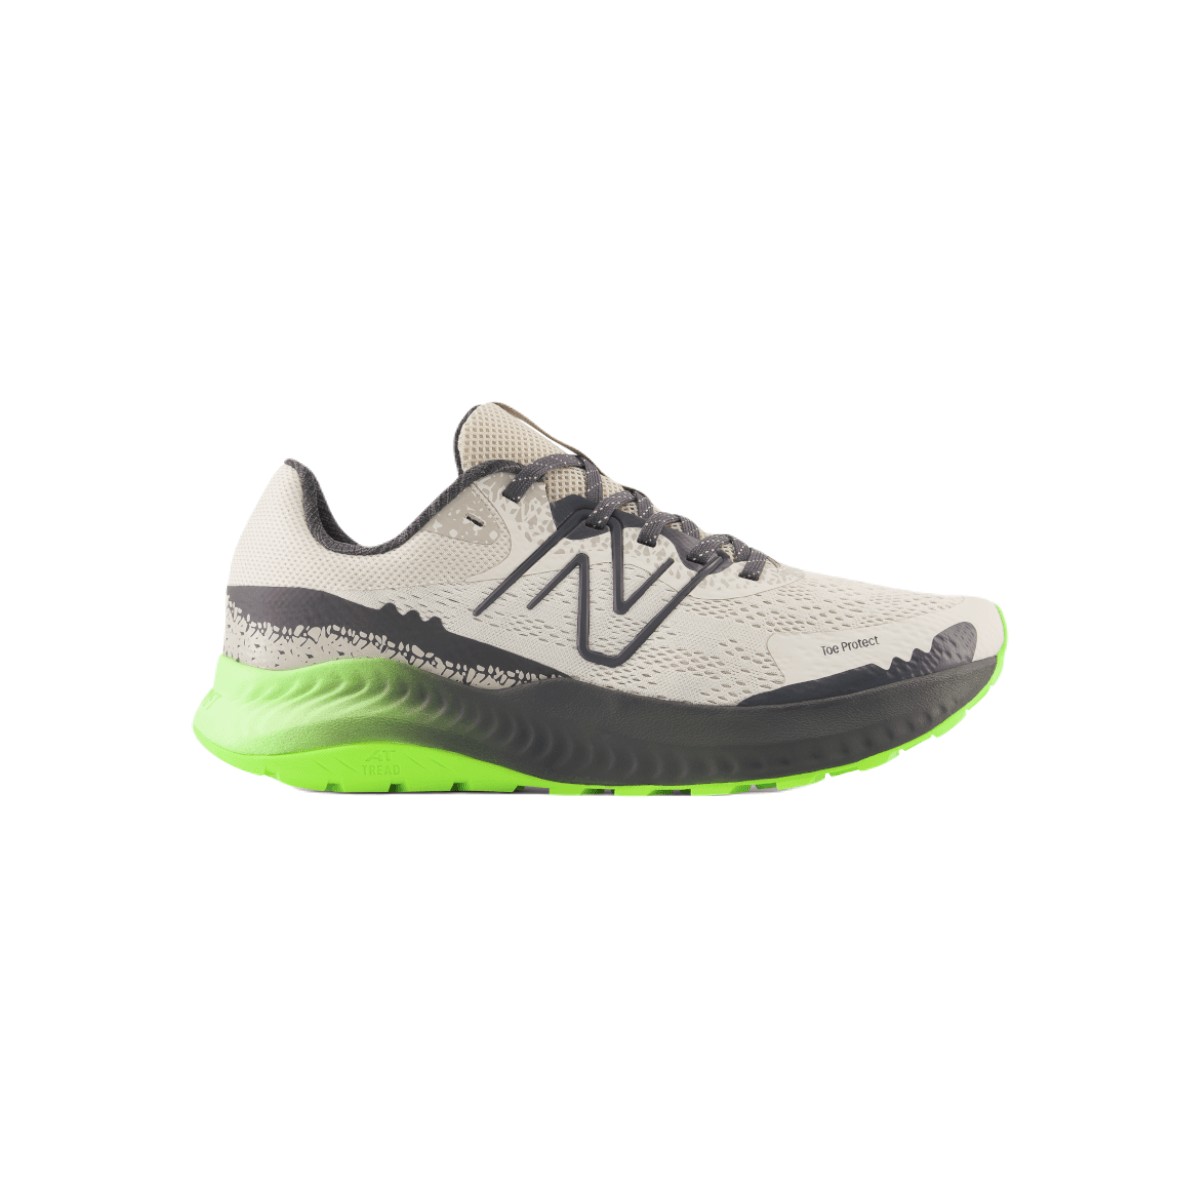 New Balance Dynasoft Gris Vert AW22 Chaussures, Taille 41,5 - EUR